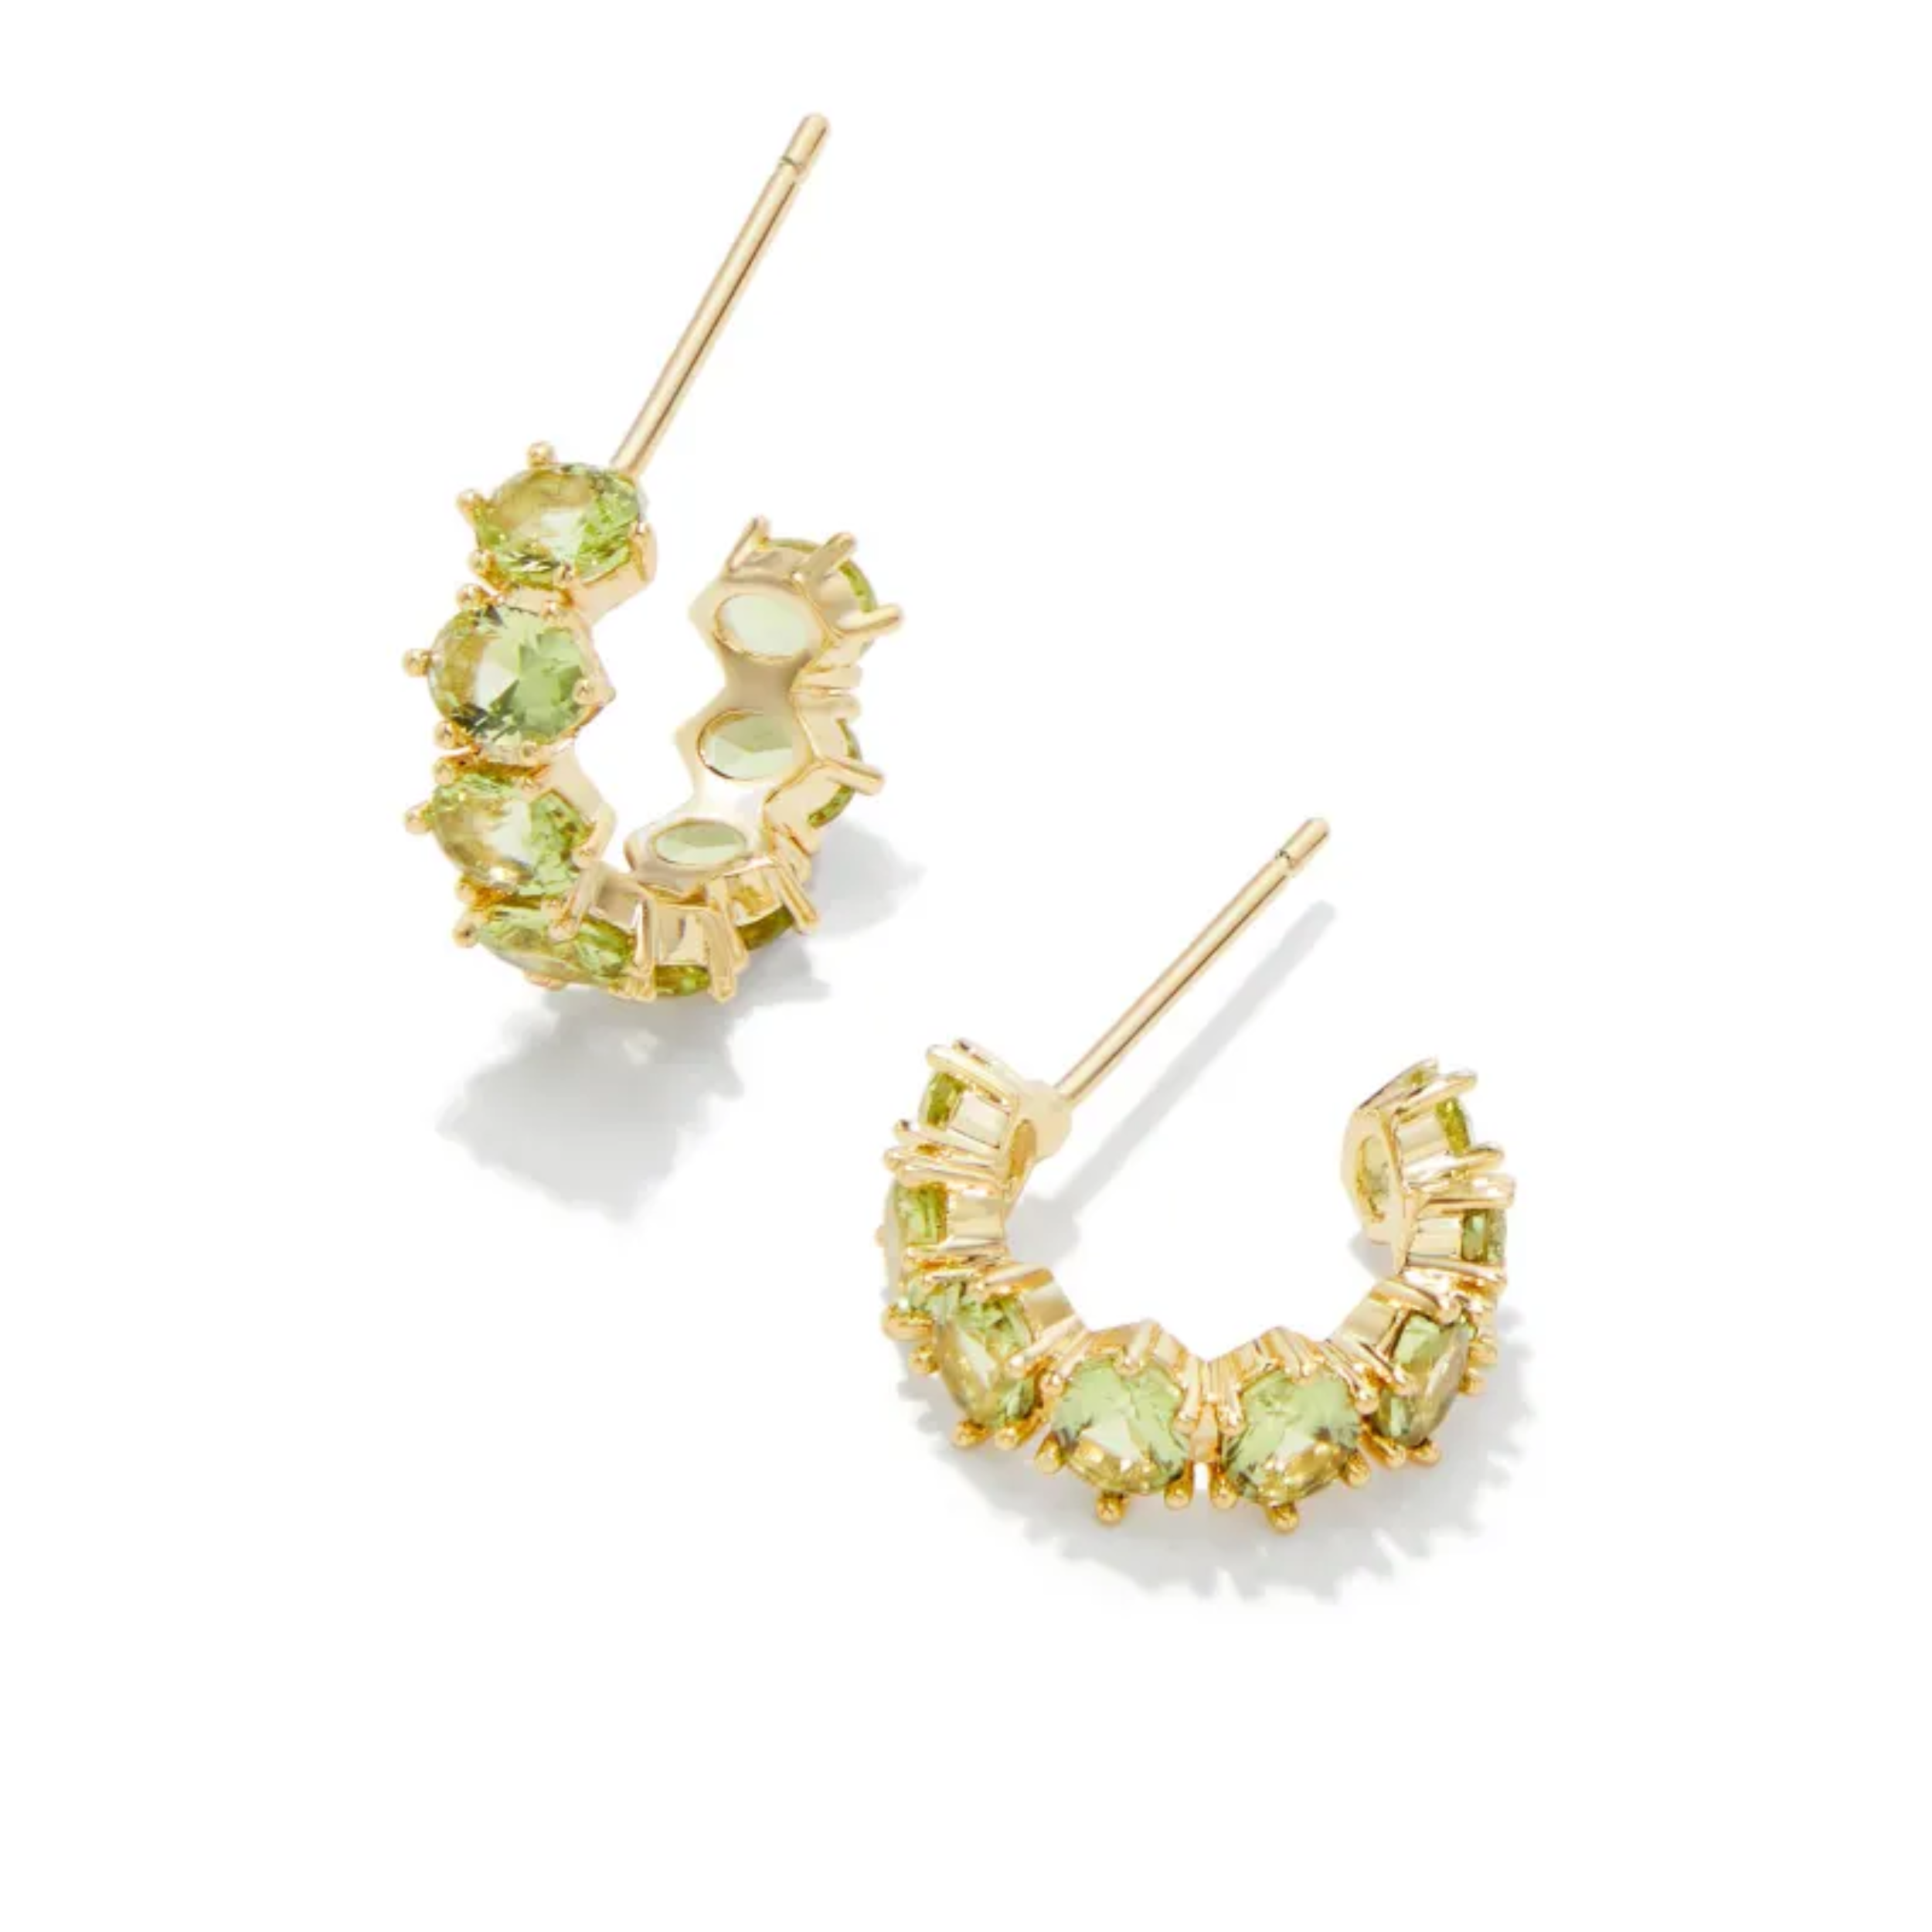 These Cailin Gold Crystal Huggie earrings in Green Peridot Crystal by Kendra Scott are pictured on a white background.